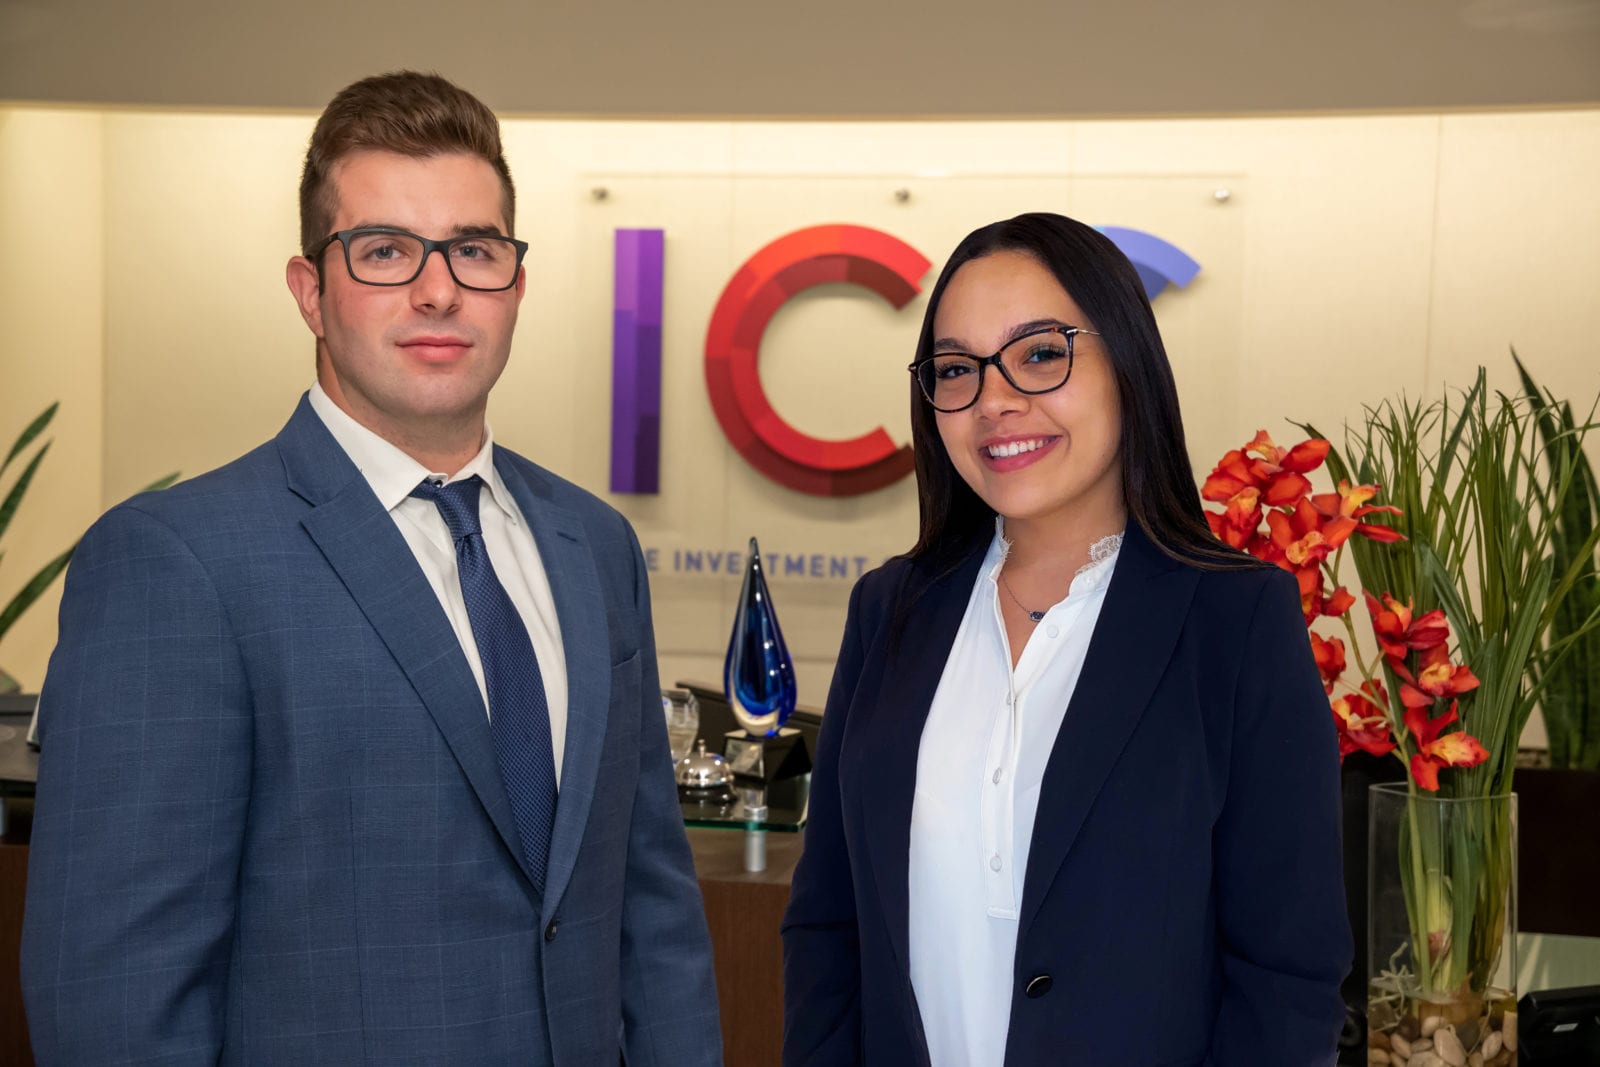 Investment Counsel Company Client Services Project Managers Alec Mono and Alexis Miranda